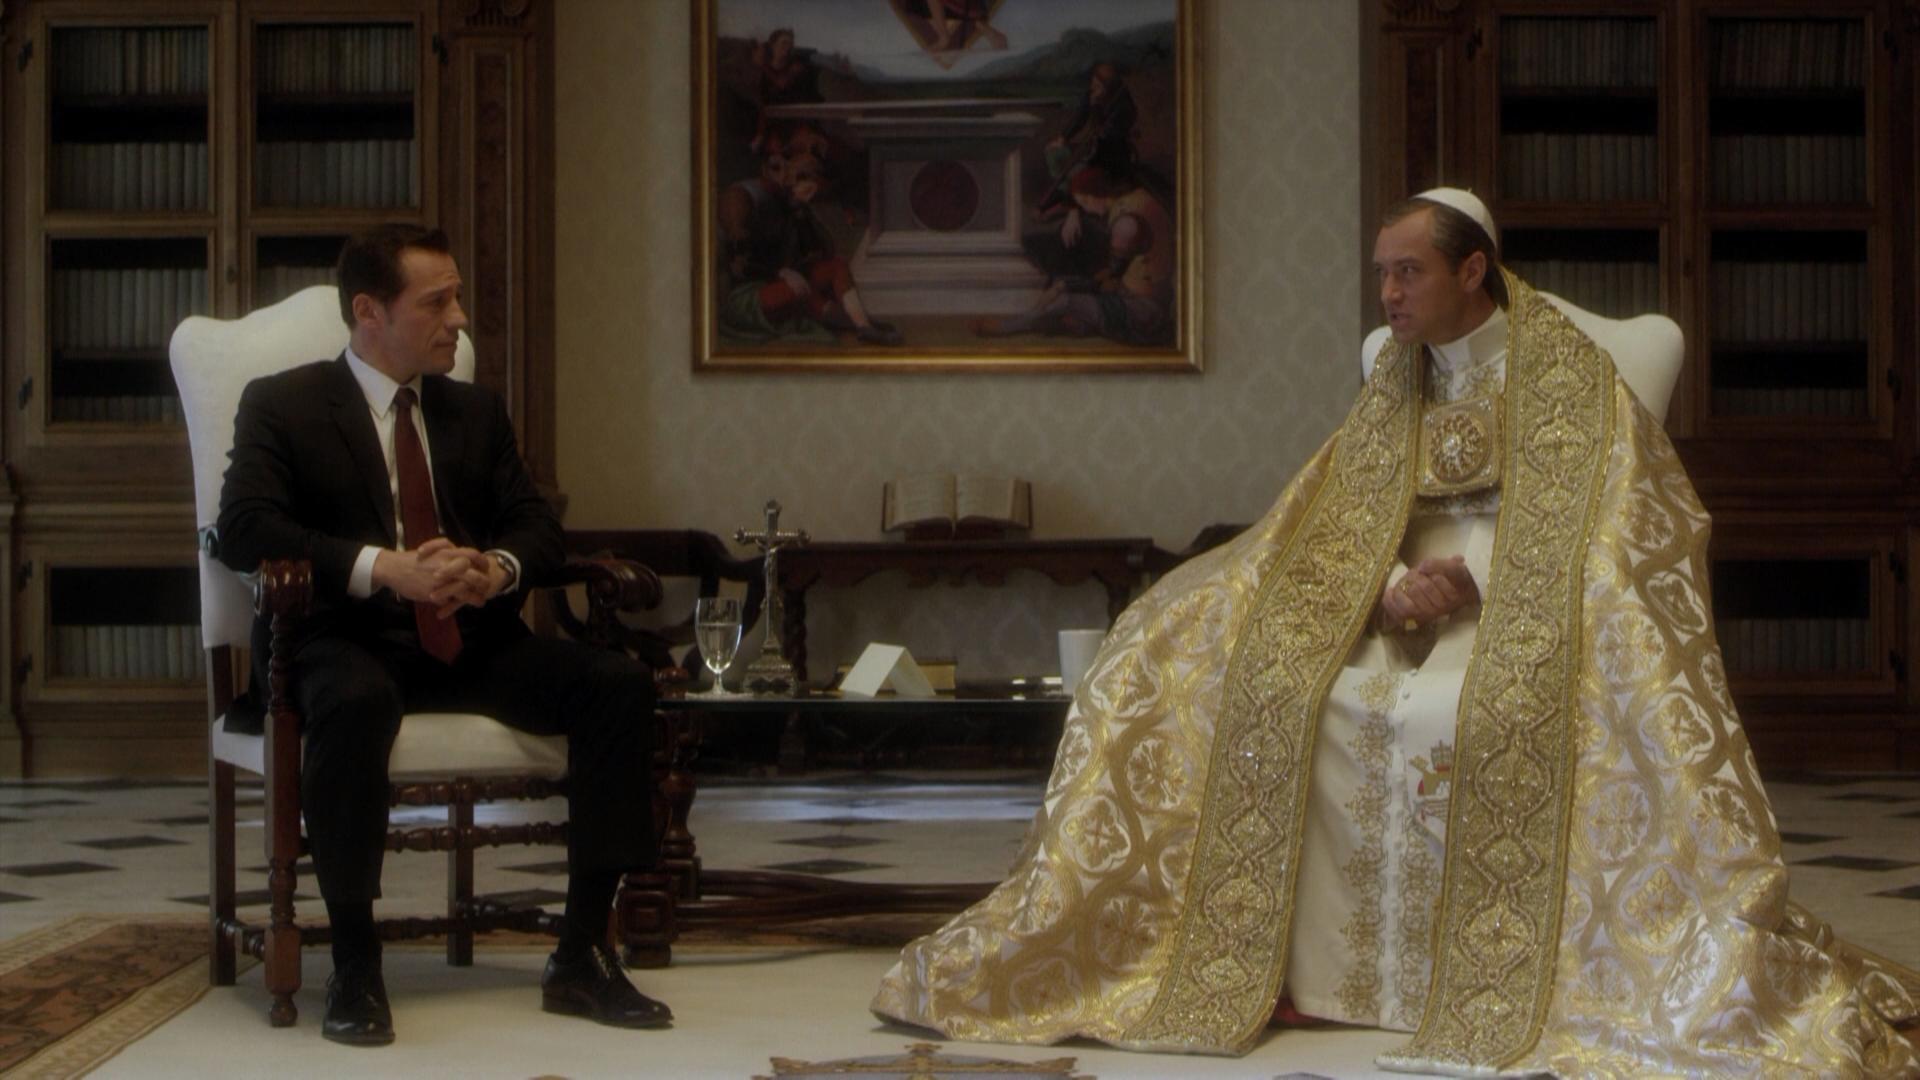 The Young Pope Episode .6 (TV Episode 2016)